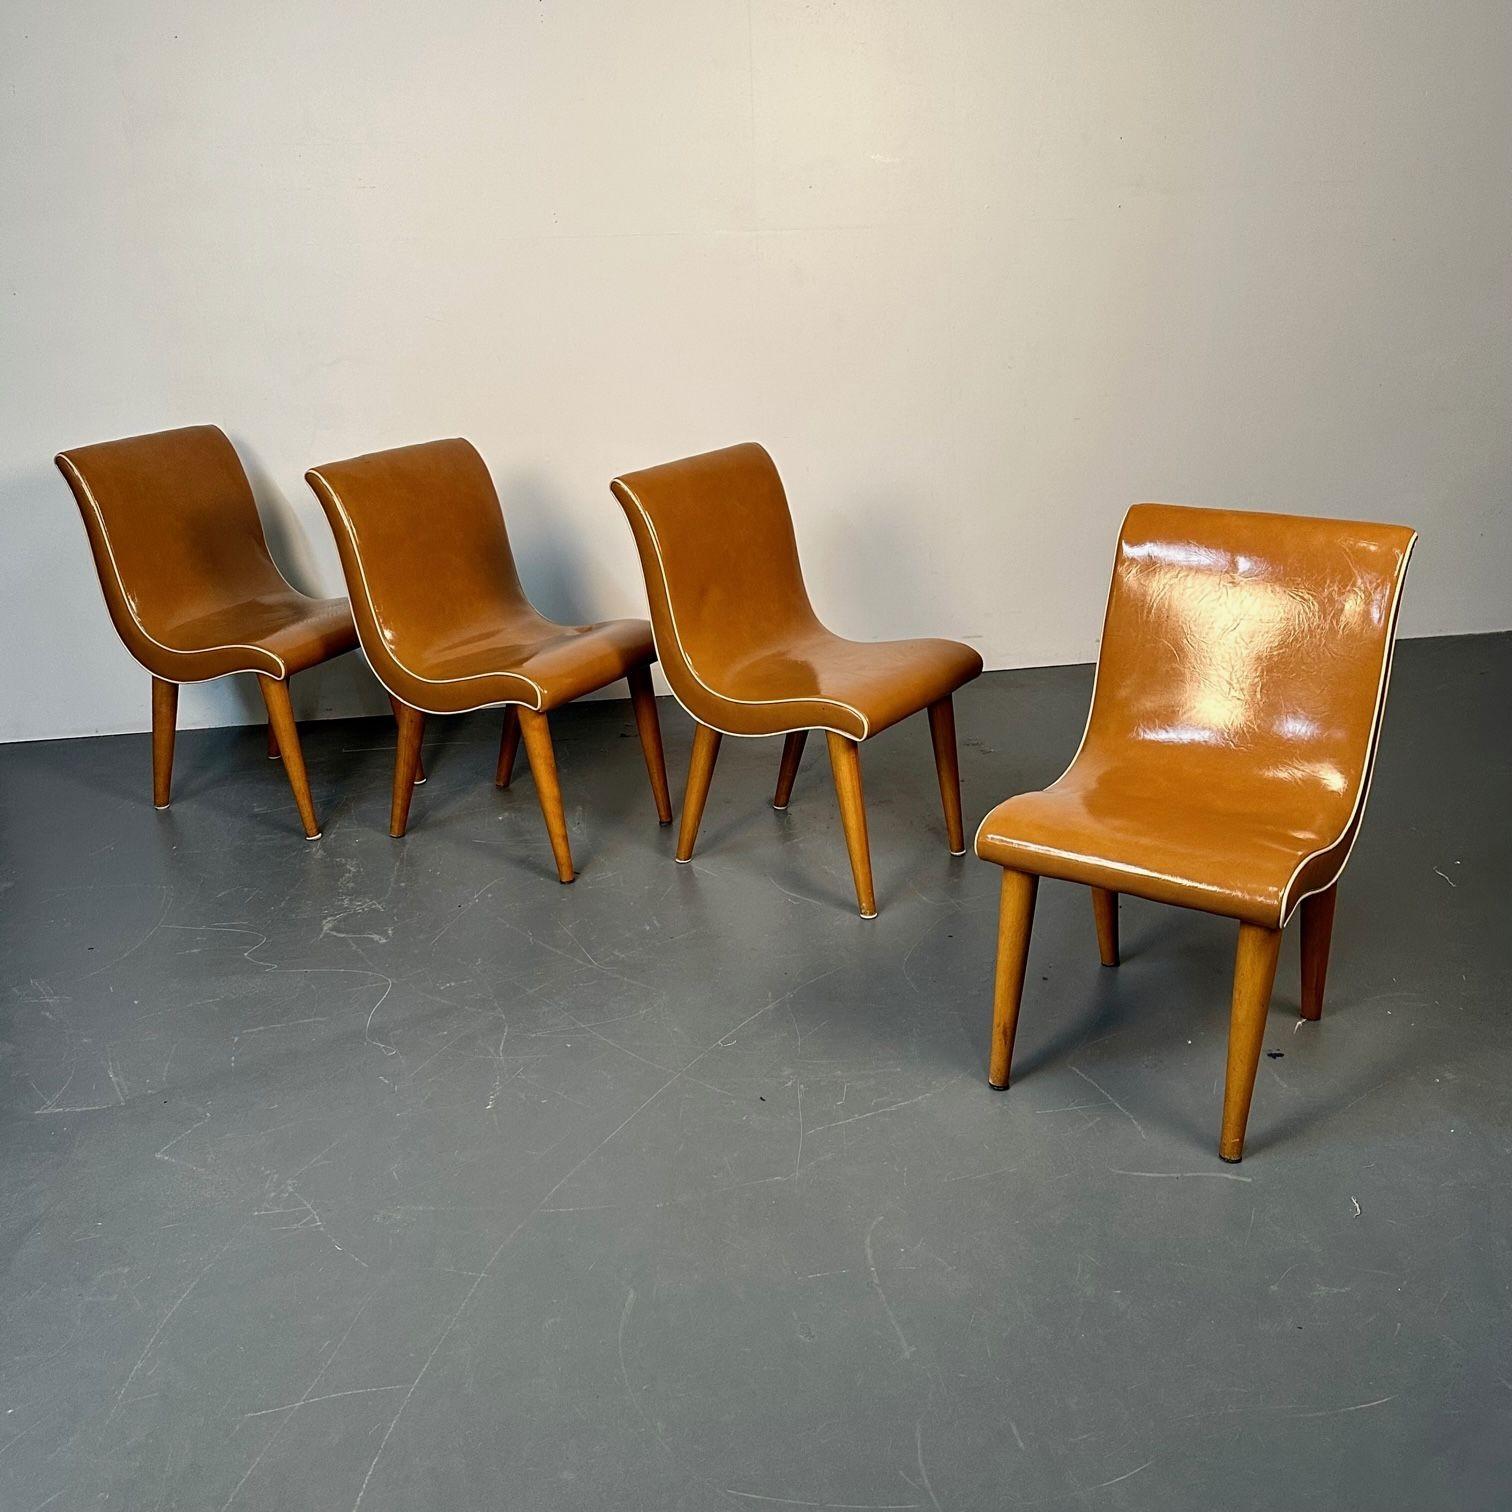 Mid-20th Century Four American Mid-Century Modern Curvy Dining / Side Chairs by Russel Wright For Sale